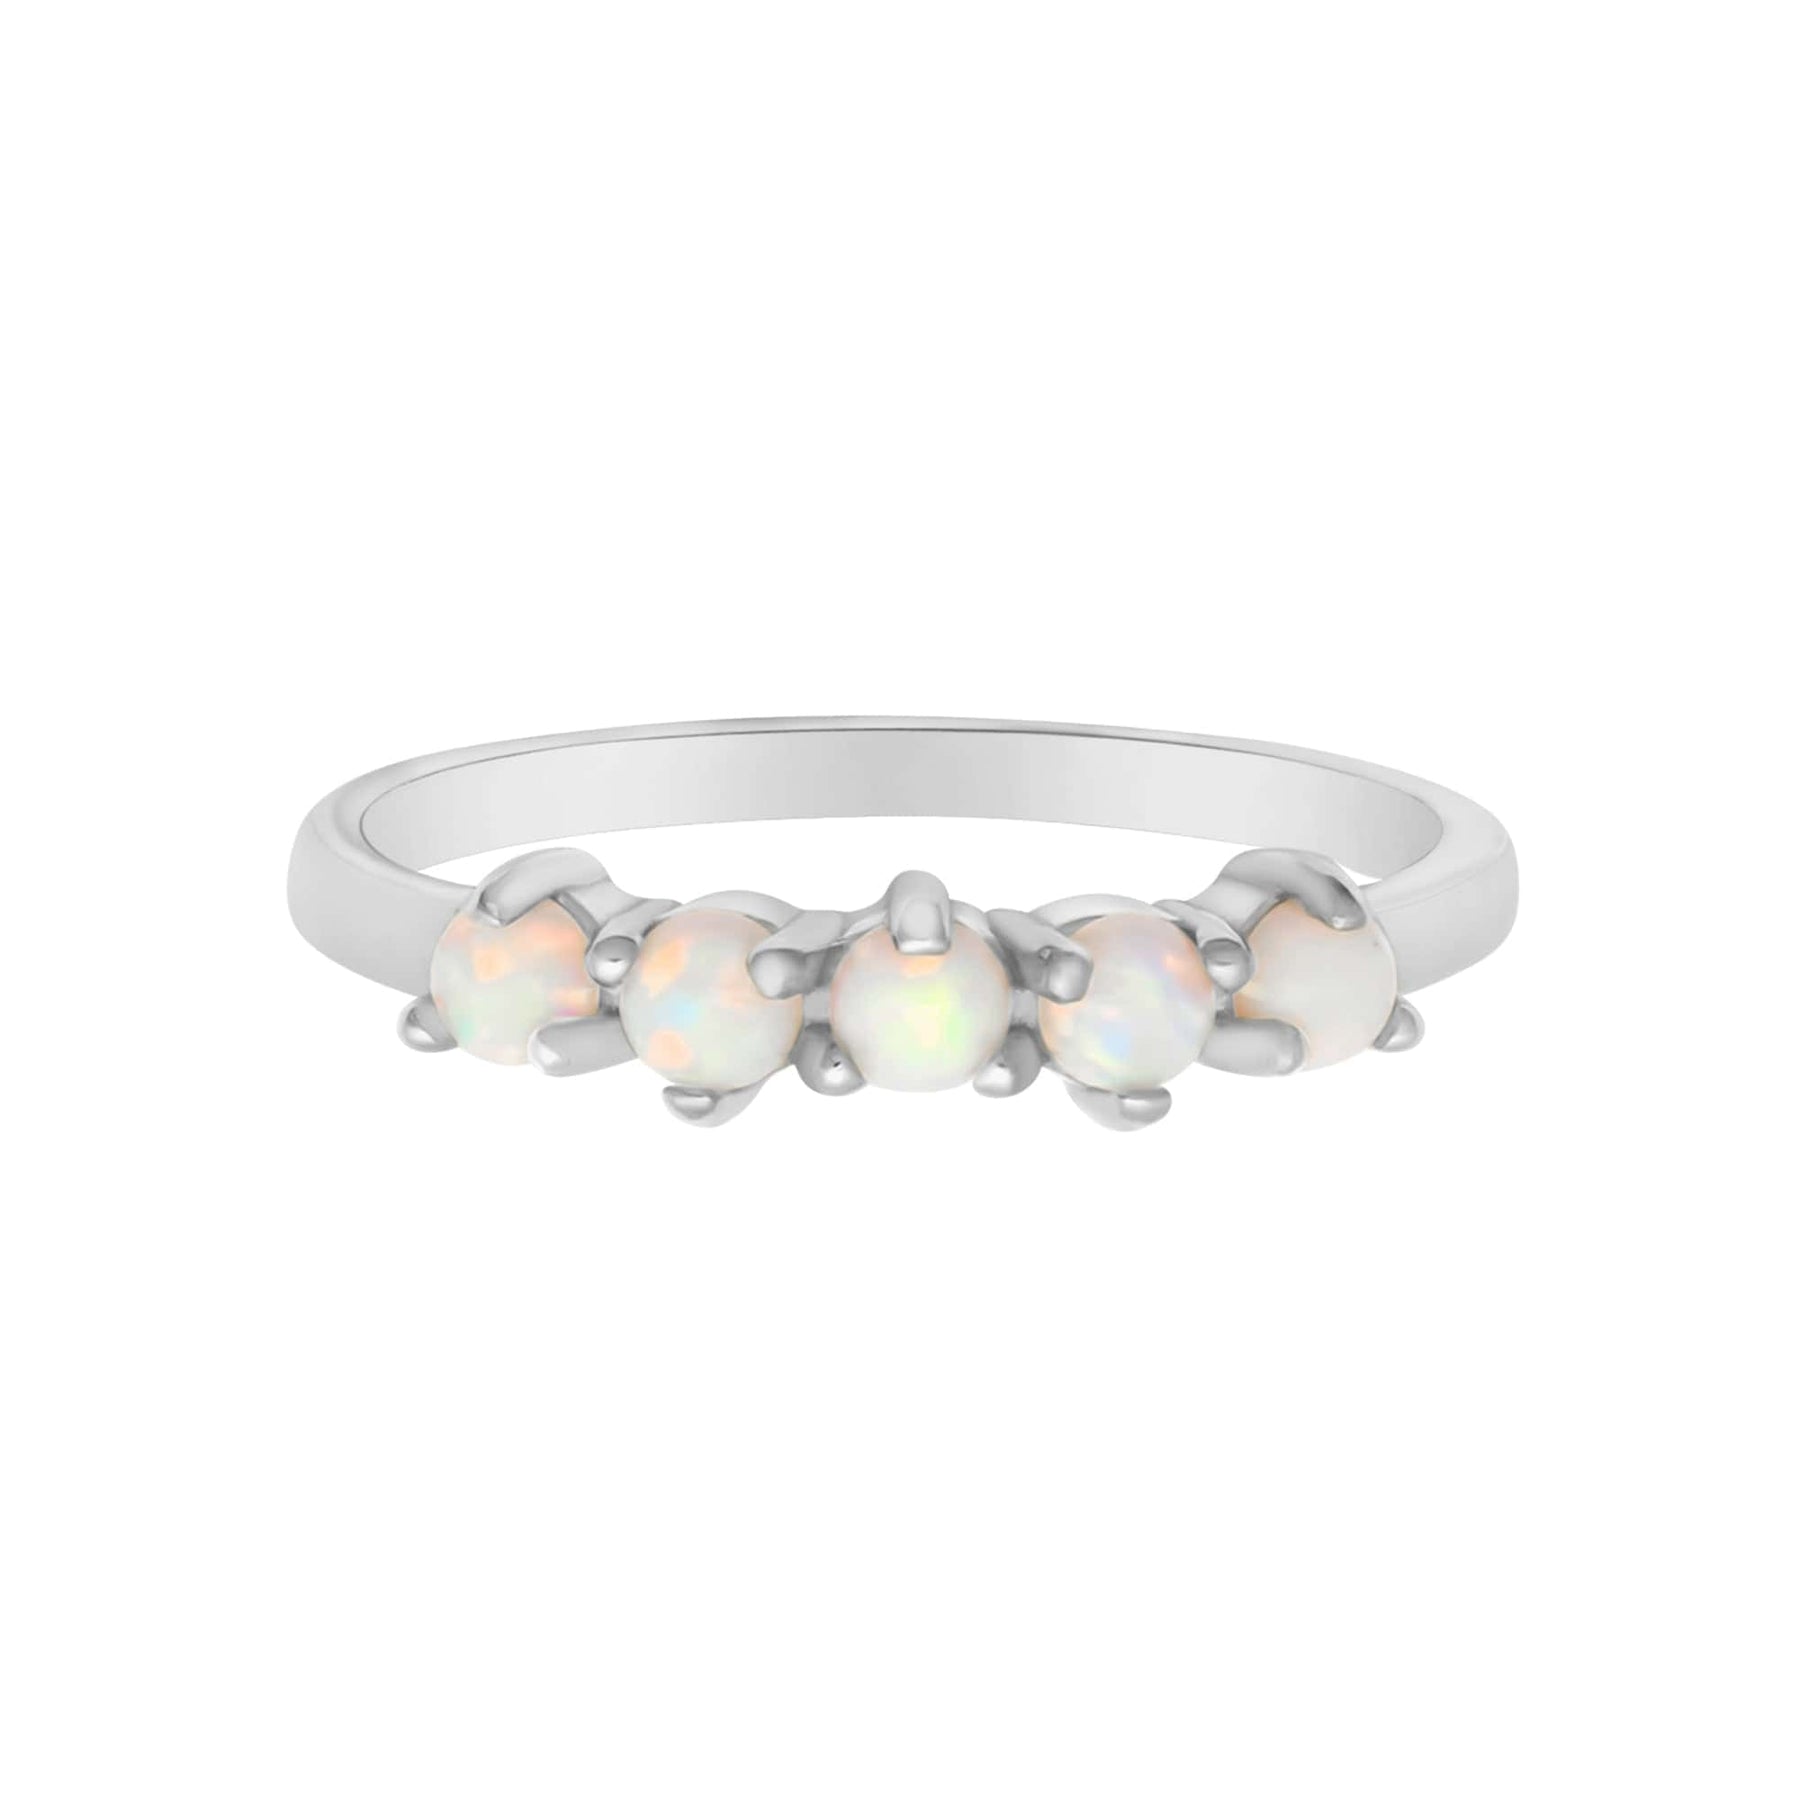 BohoMoon Stainless Steel Arctic Opal Ring Silver / US 4 / UK H / EUR 46 / (xxsmall)